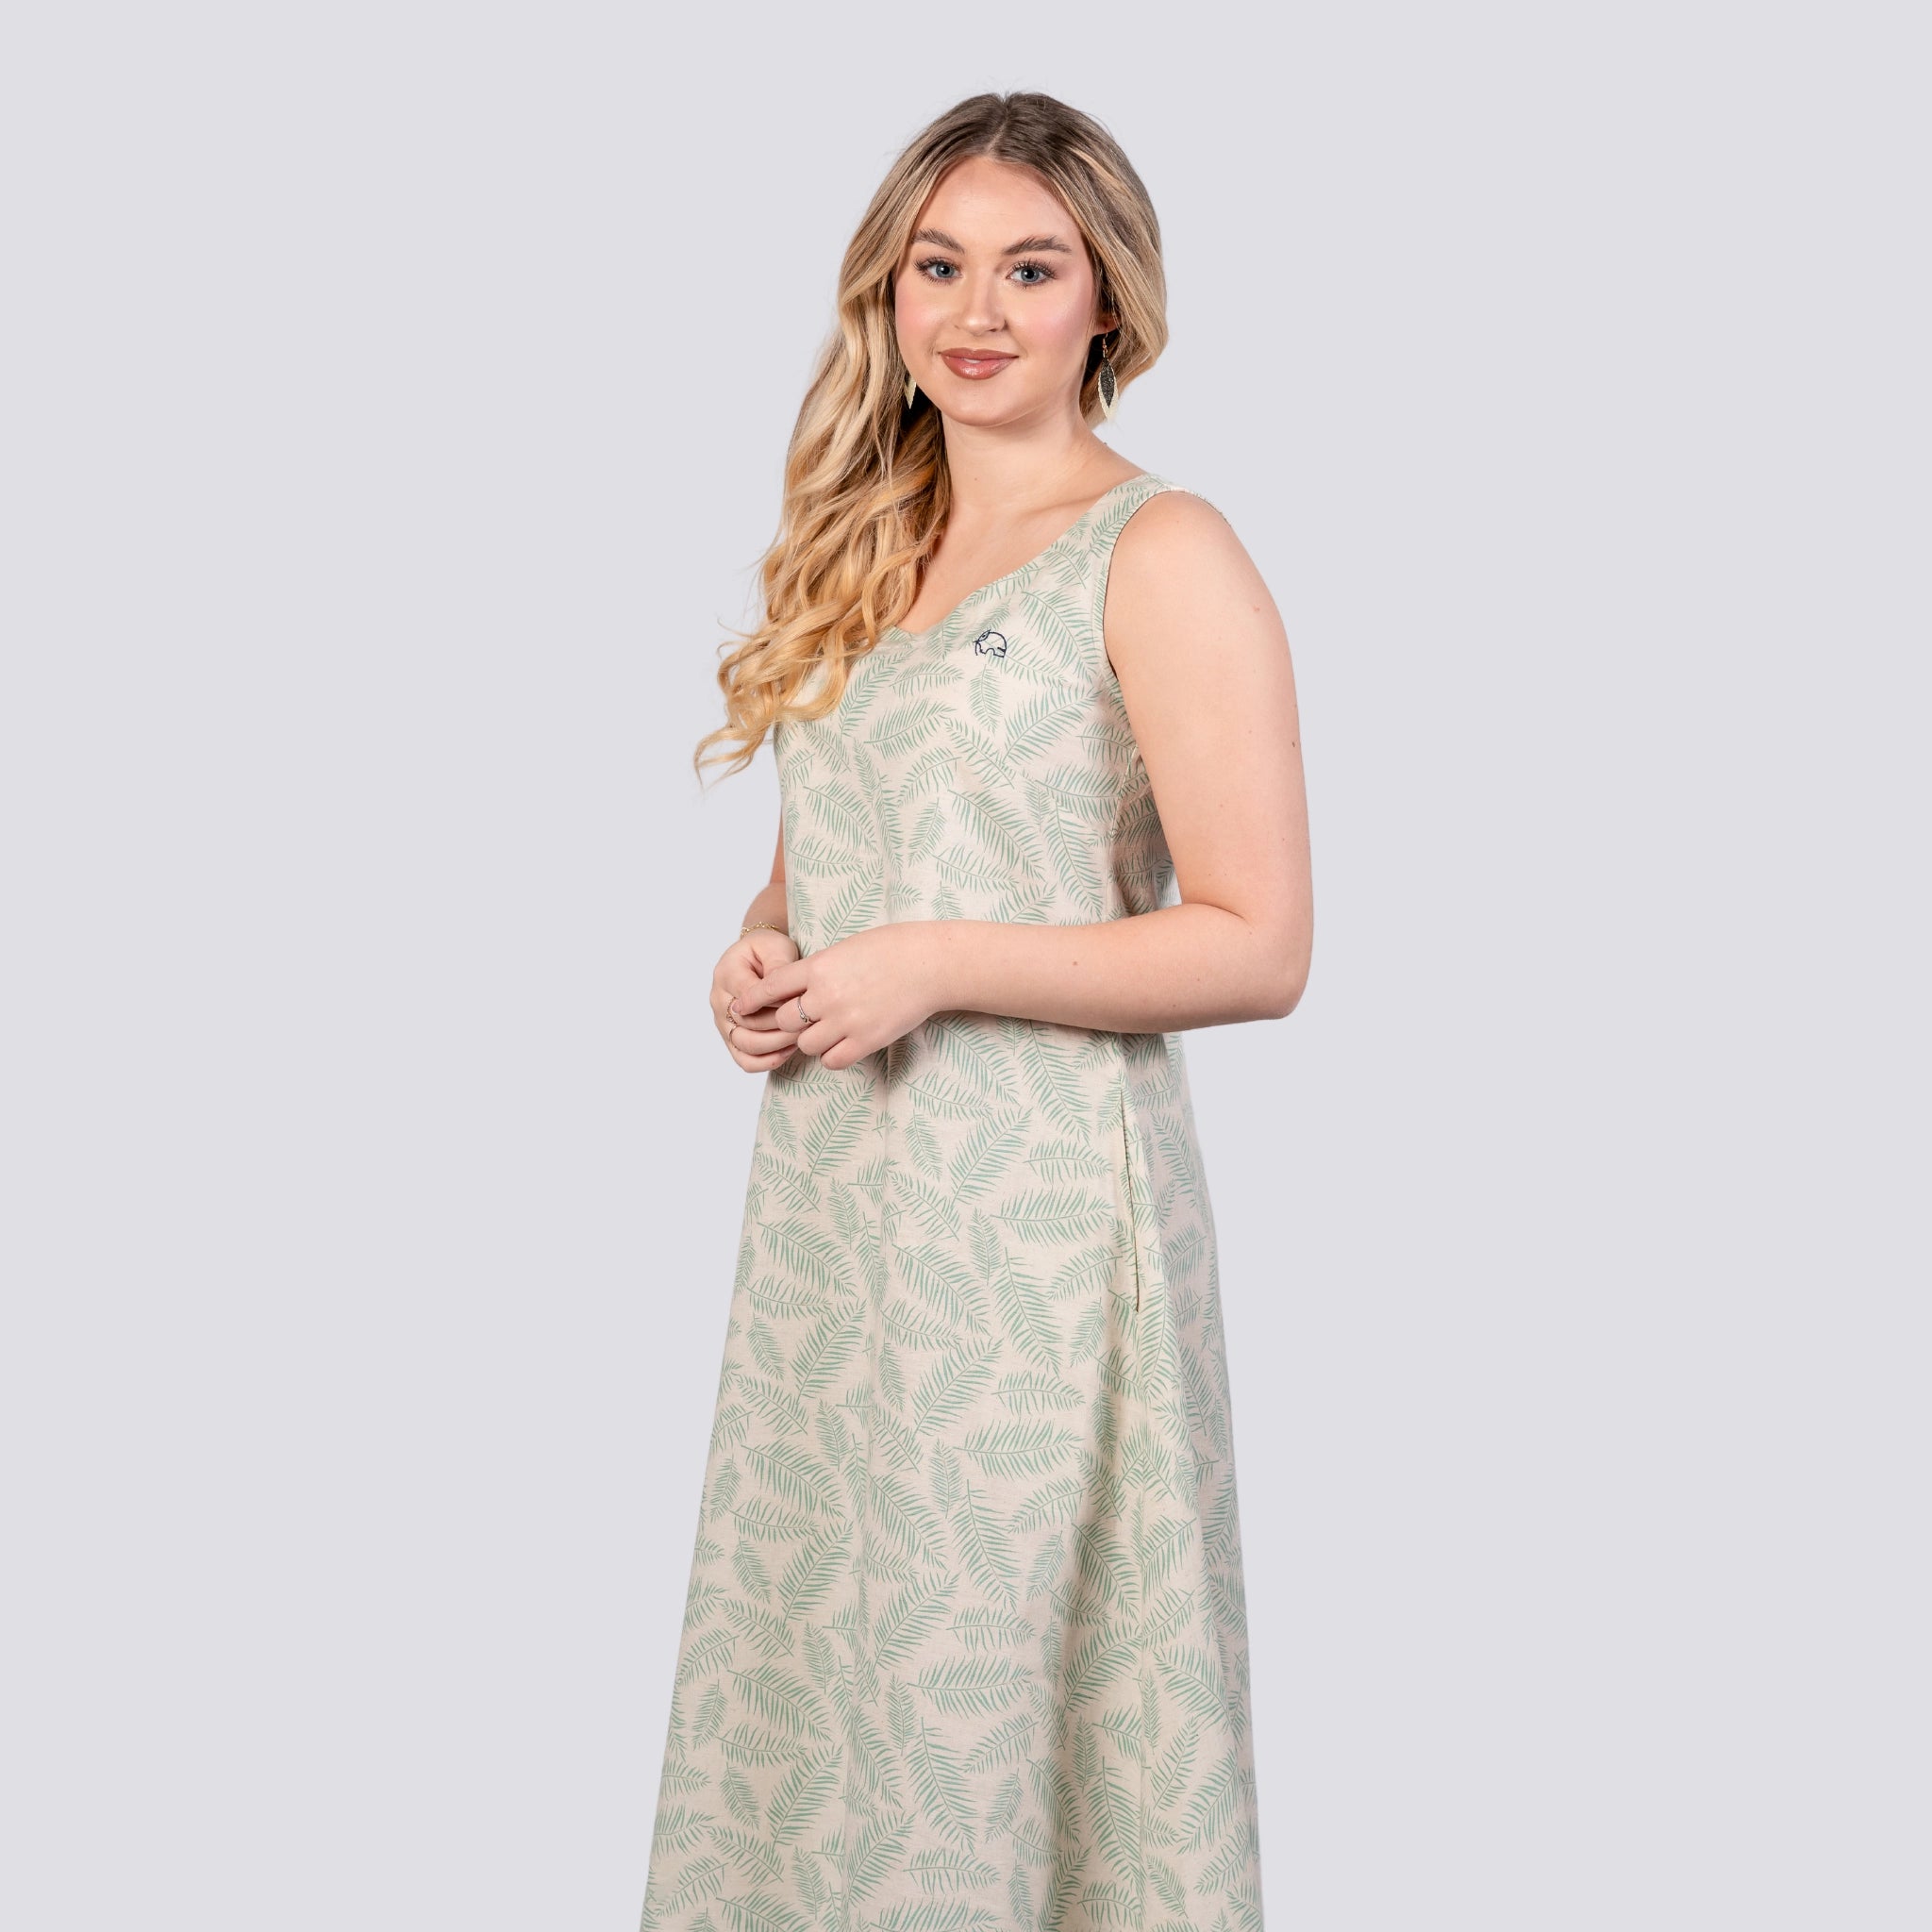 Young woman in a Karee Mystic Breeze High Low Linen Cotton Midi Dress, standing against a light gray background, smiling slightly.